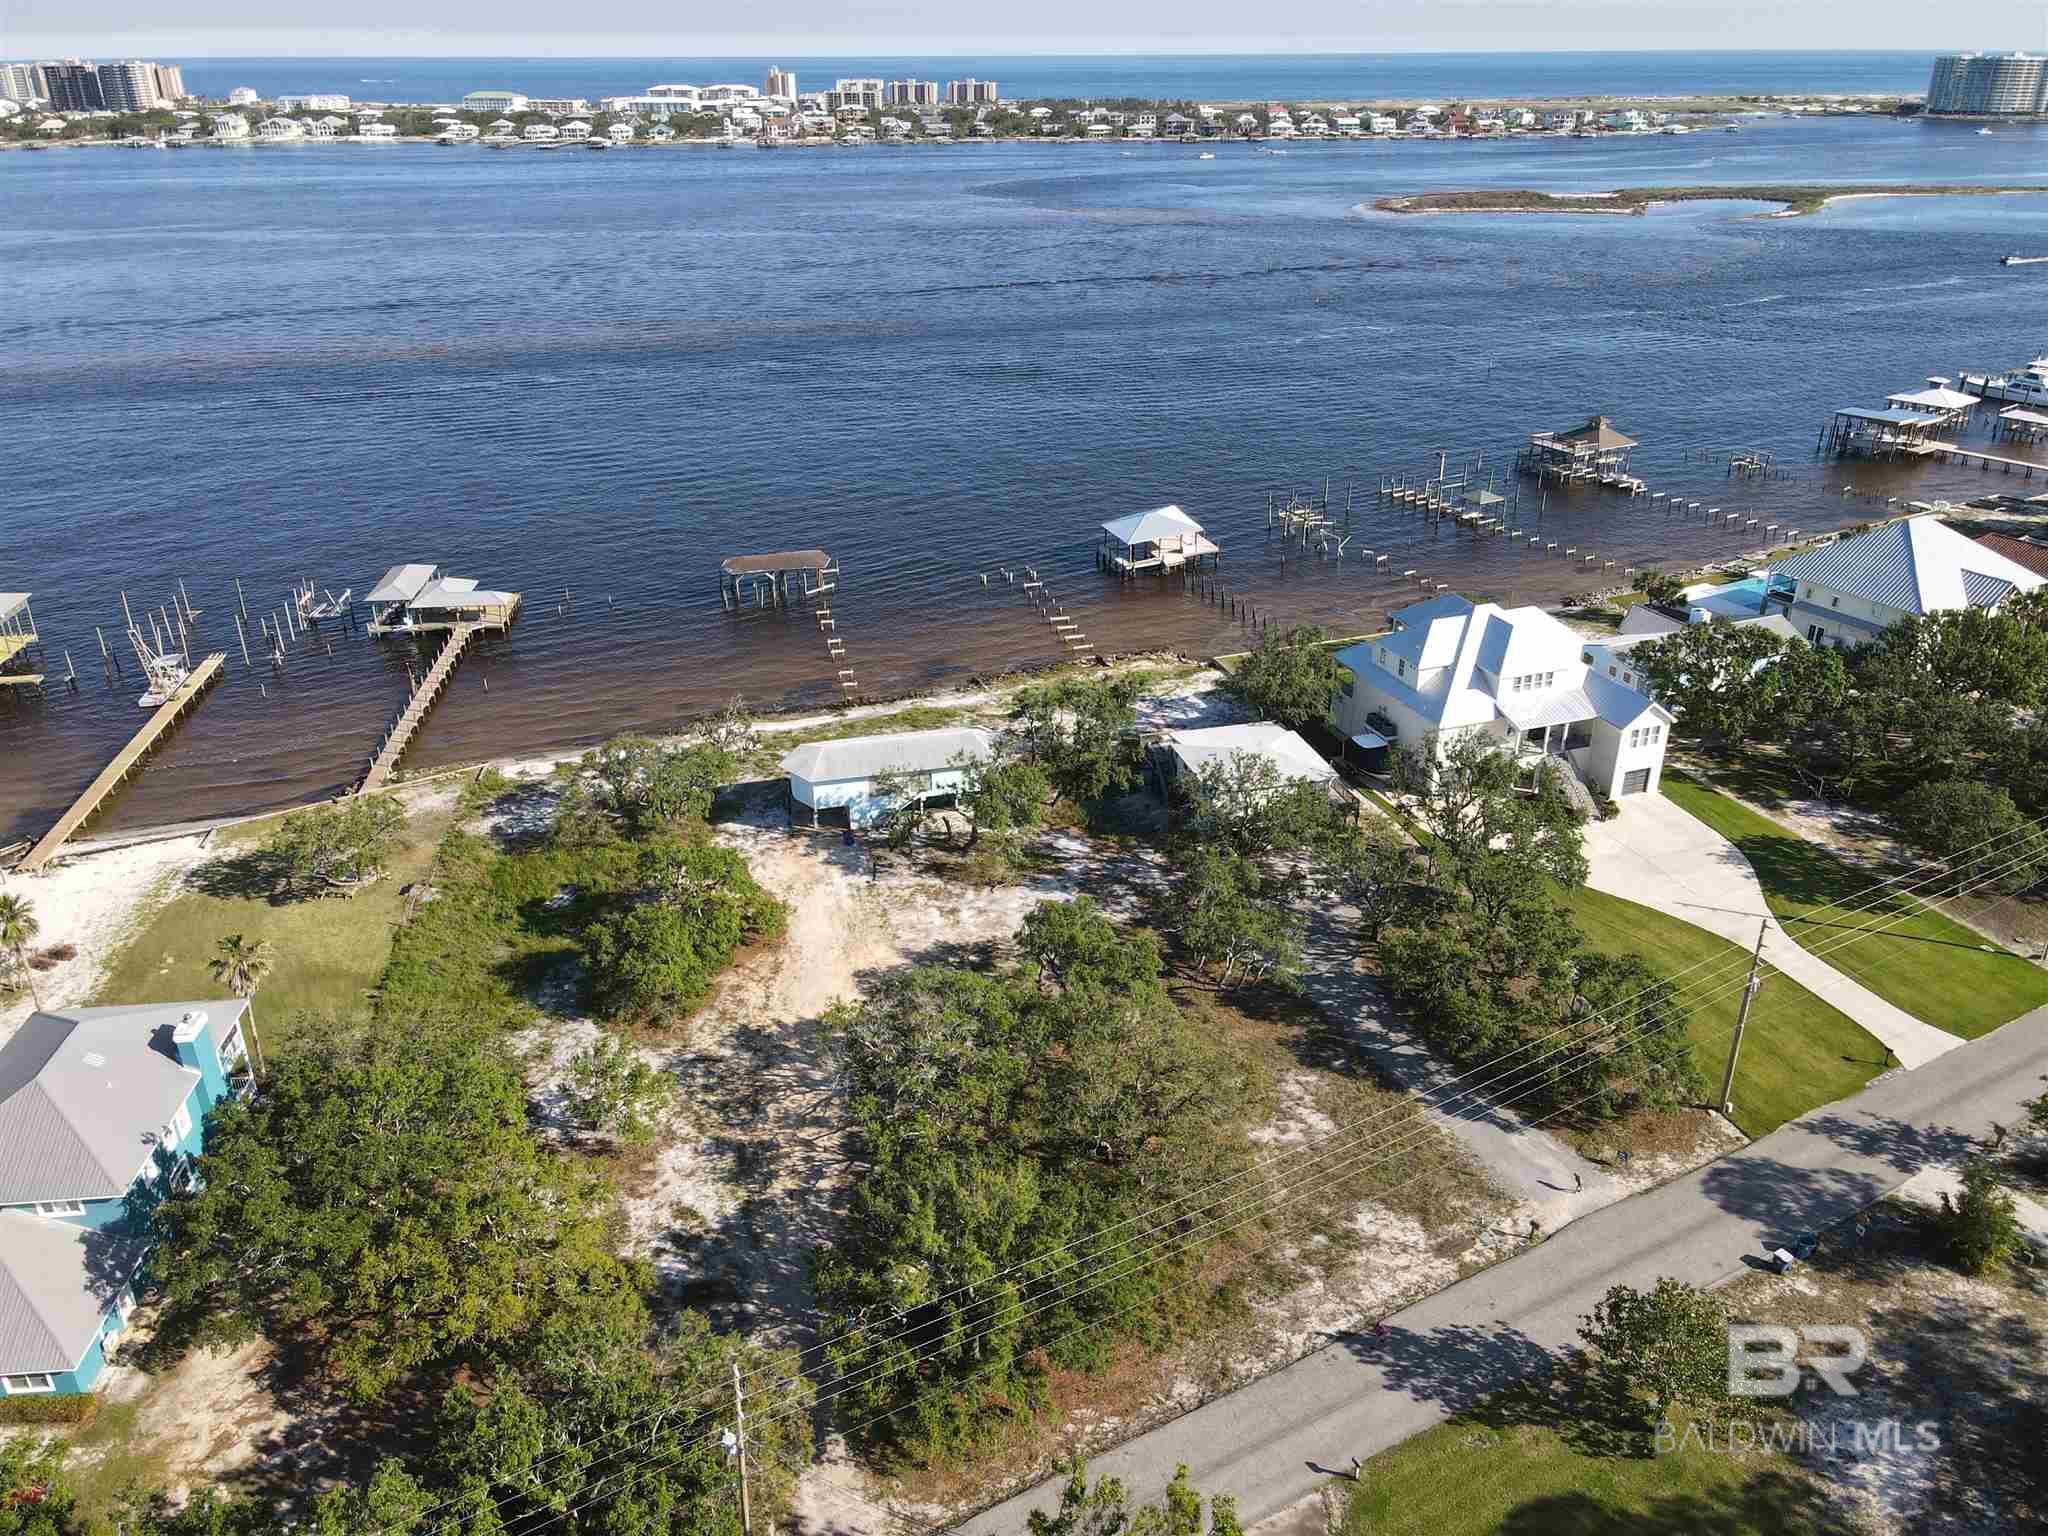 UNIQUE OPPORTUNITY to own TWO WATERFRONT LOTS on Bayou St. John. View The Pass and Gulf from your pier. Imagine your own family compound on these beautiful Bayou front lots with your own private marina and minutes to the Gulf and great fishing. These parcels are being sold together with more than 155 feet on the best waterfront in Orange Beach.  Both lots have older homes on them and are sold "as-is". 28442 Burkart has 2 bedrooms and one bath upstairs and a laundry/bath downstairs. 28470 is usually vacant and features 2 bedrooms and one bath. The lots have 200 feet on the road and are approximately 285 feet deep. Owners have a deeded interest in the boat ramp at the end of Burkart Lane.